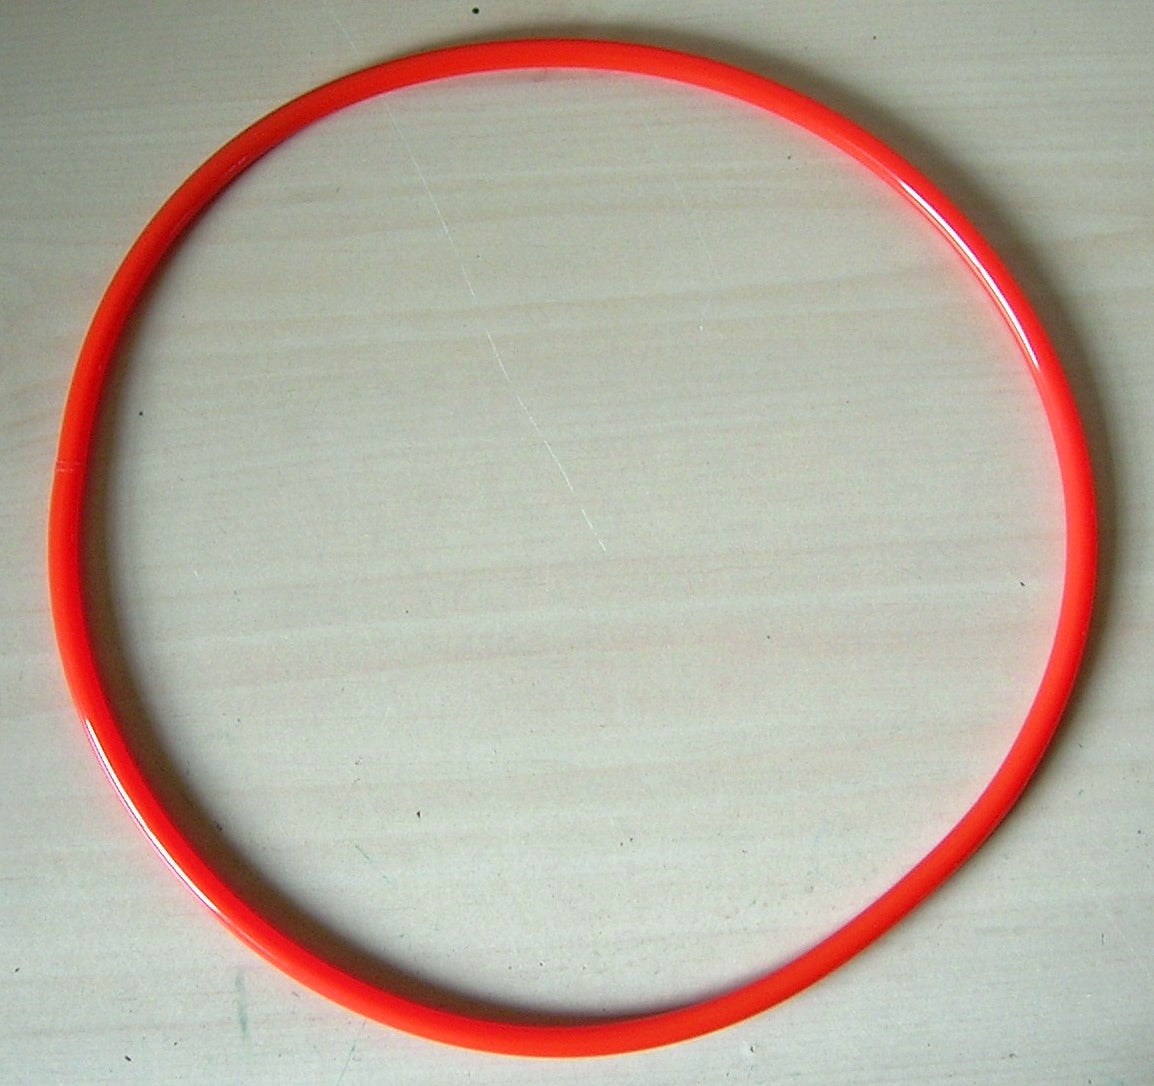 Replacement Round Drive BELT for VWR mini shaker 980130